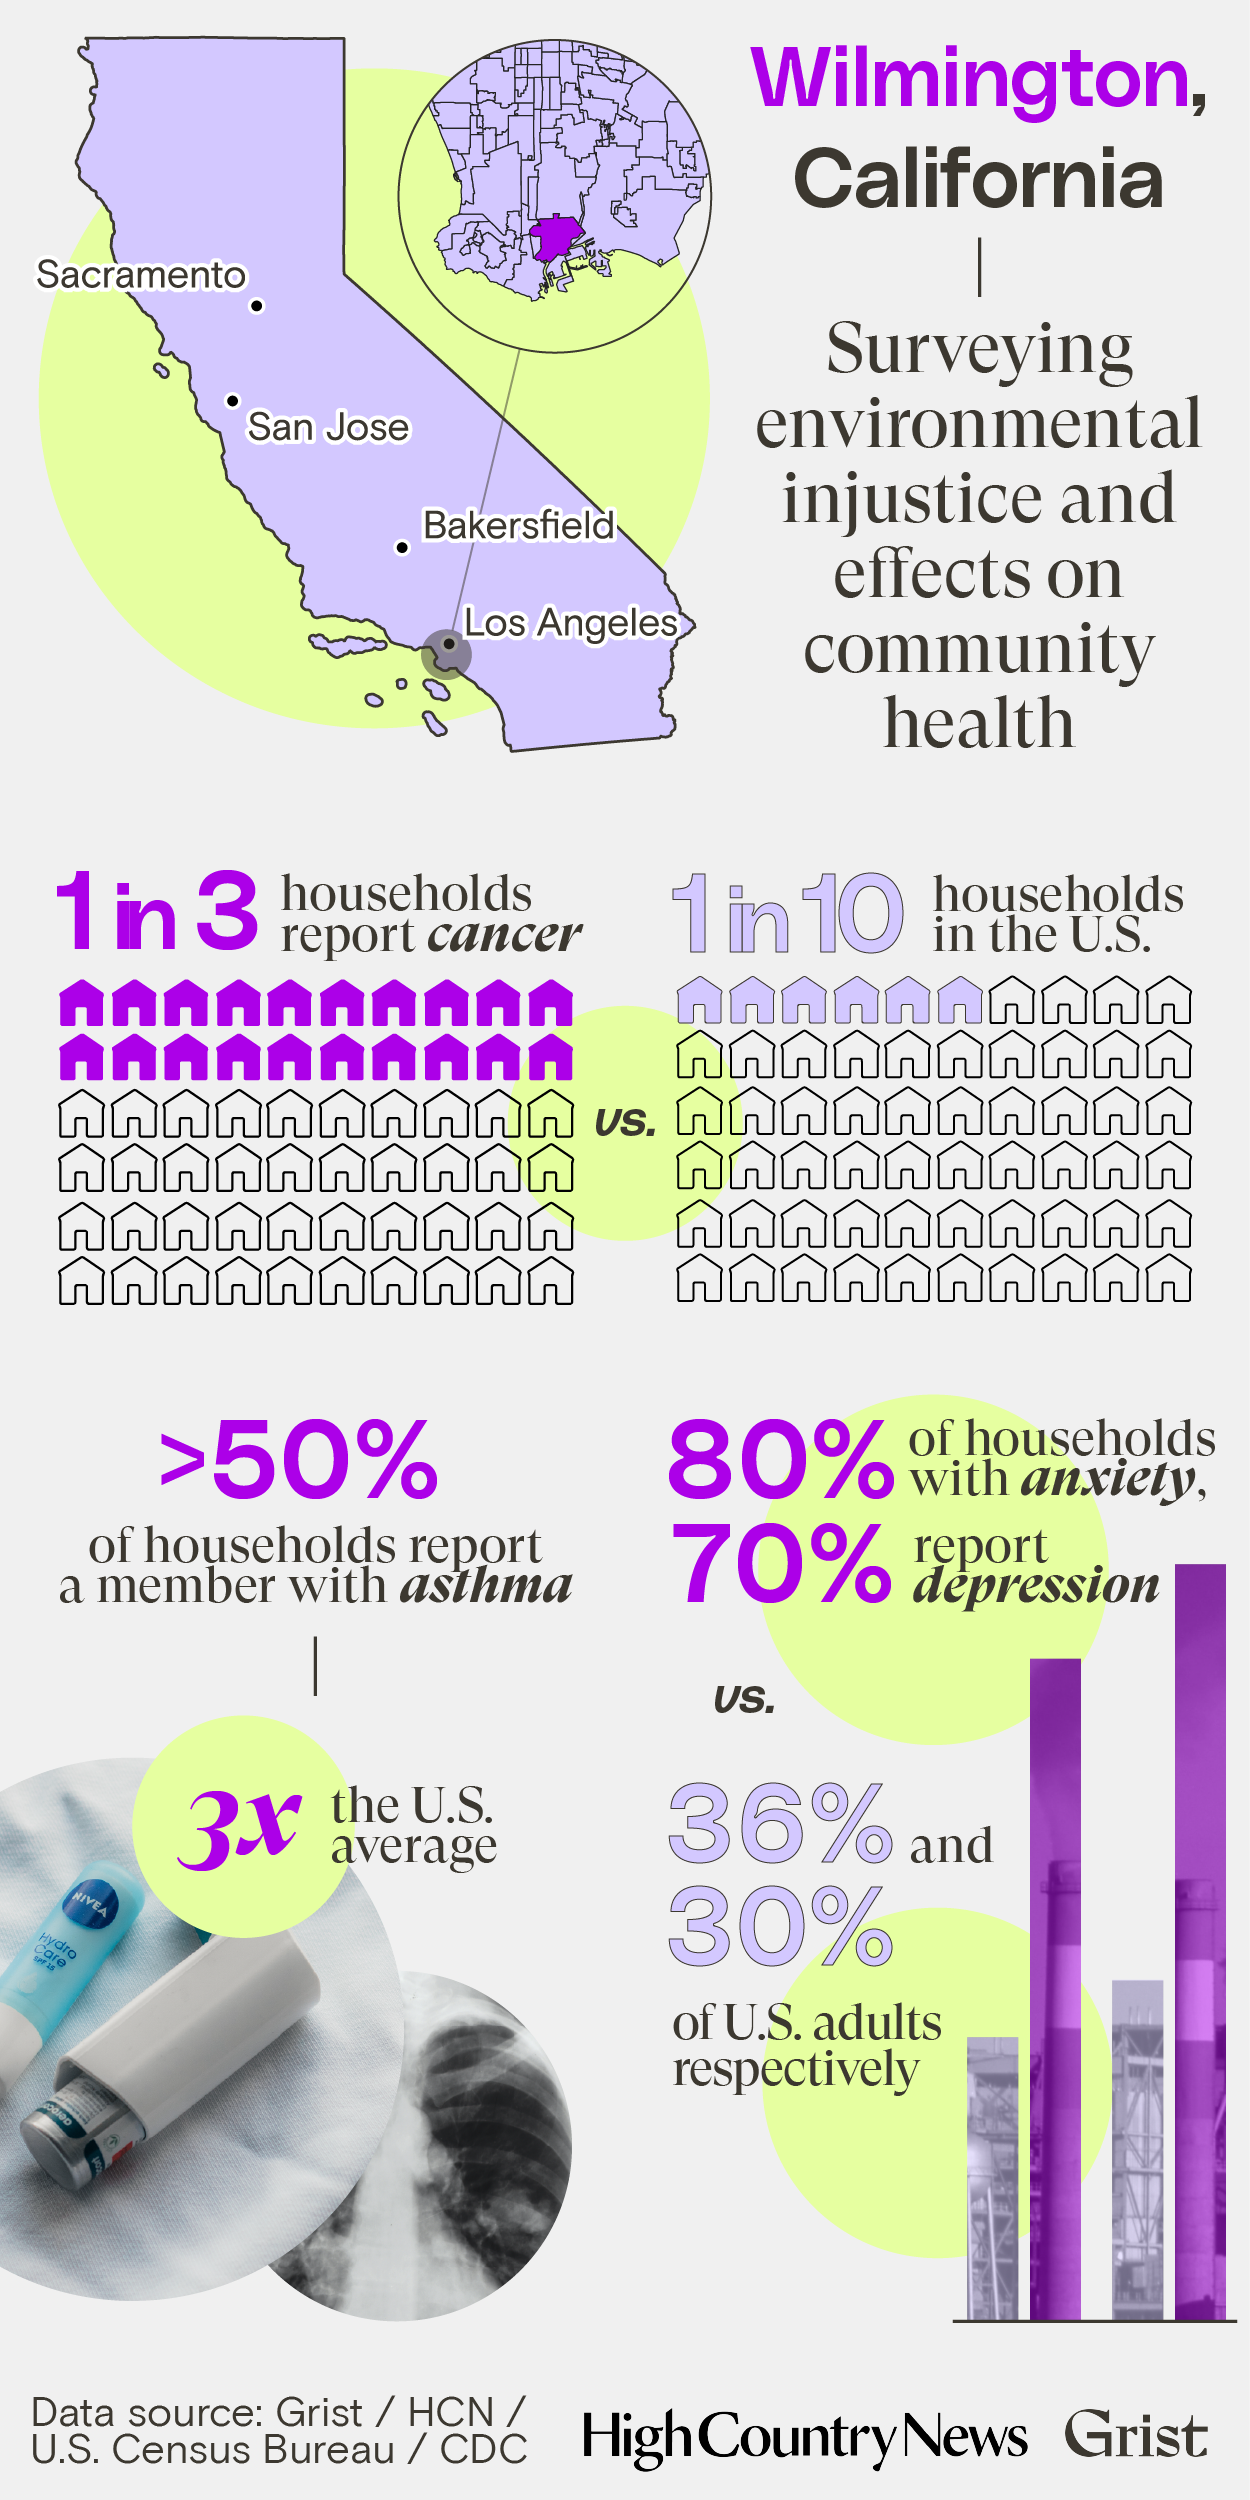 An infographic reporting the results of a survey of community health in Wilmington, California. 1 in 3 households report a member with cancer (compared to 1 in 10 U.S. households). More than half report a member with asthma (3x the U.S. average). 80% of households report a member with anxiety and 70% report a member with depression (compared to 36% and 30% of U.S. adults, respectively).